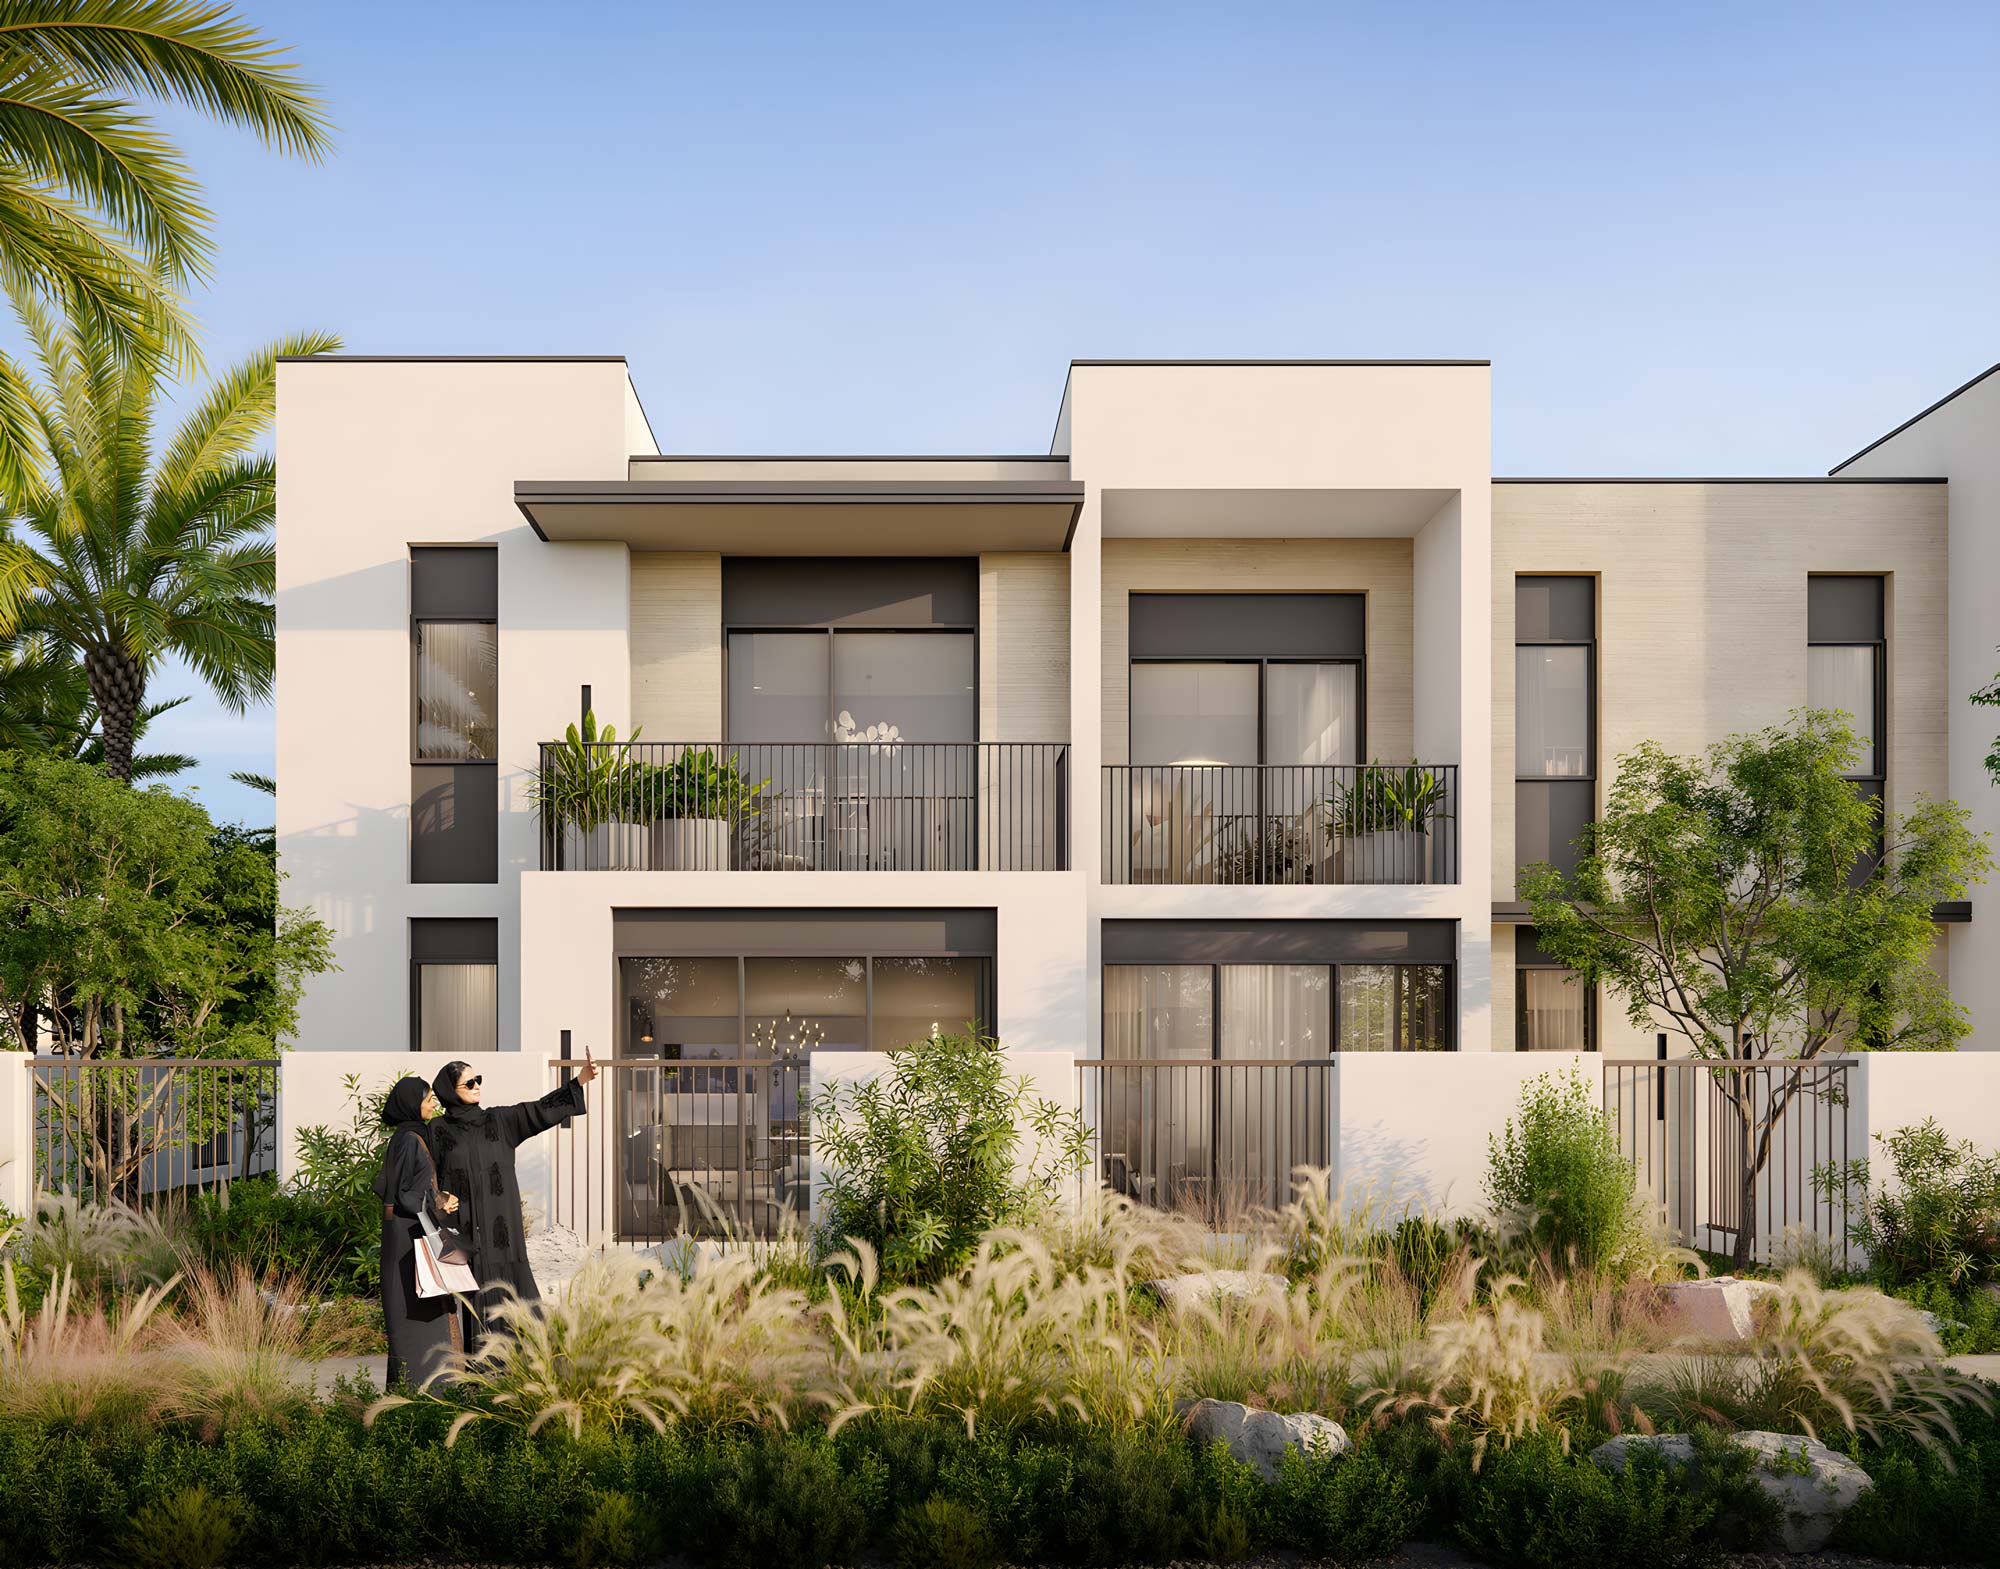 uploads/sale_property/3-br-townhouses-for-sale-in-may-at-arabian-ranches-iii/362ab7a3d0be0fce29390eeb1d09eb21.webp